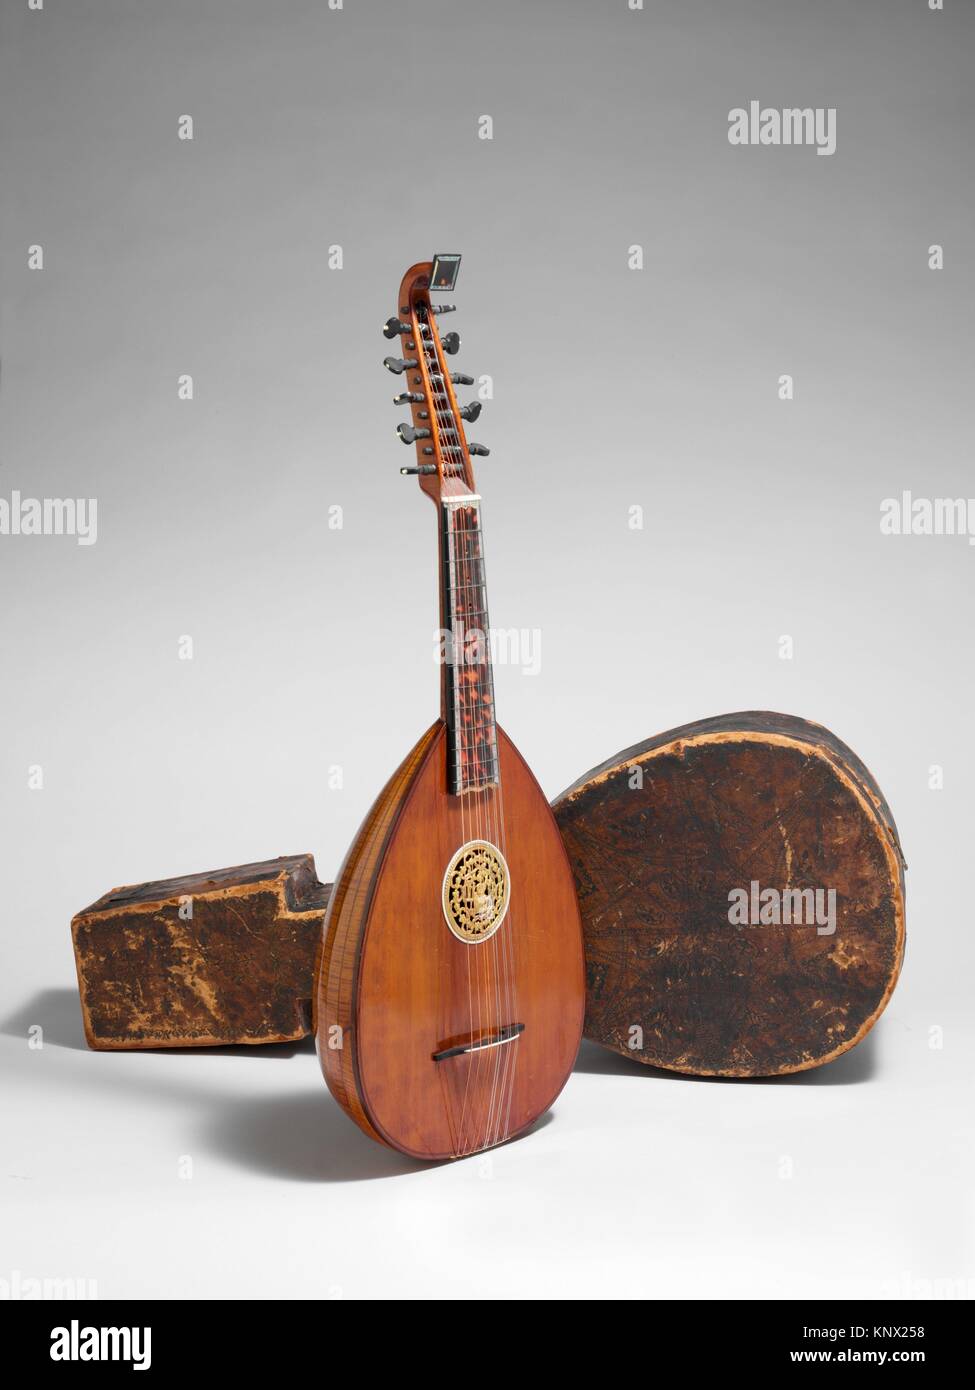 English Guitar High Resolution Stock Photography and Images - Alamy